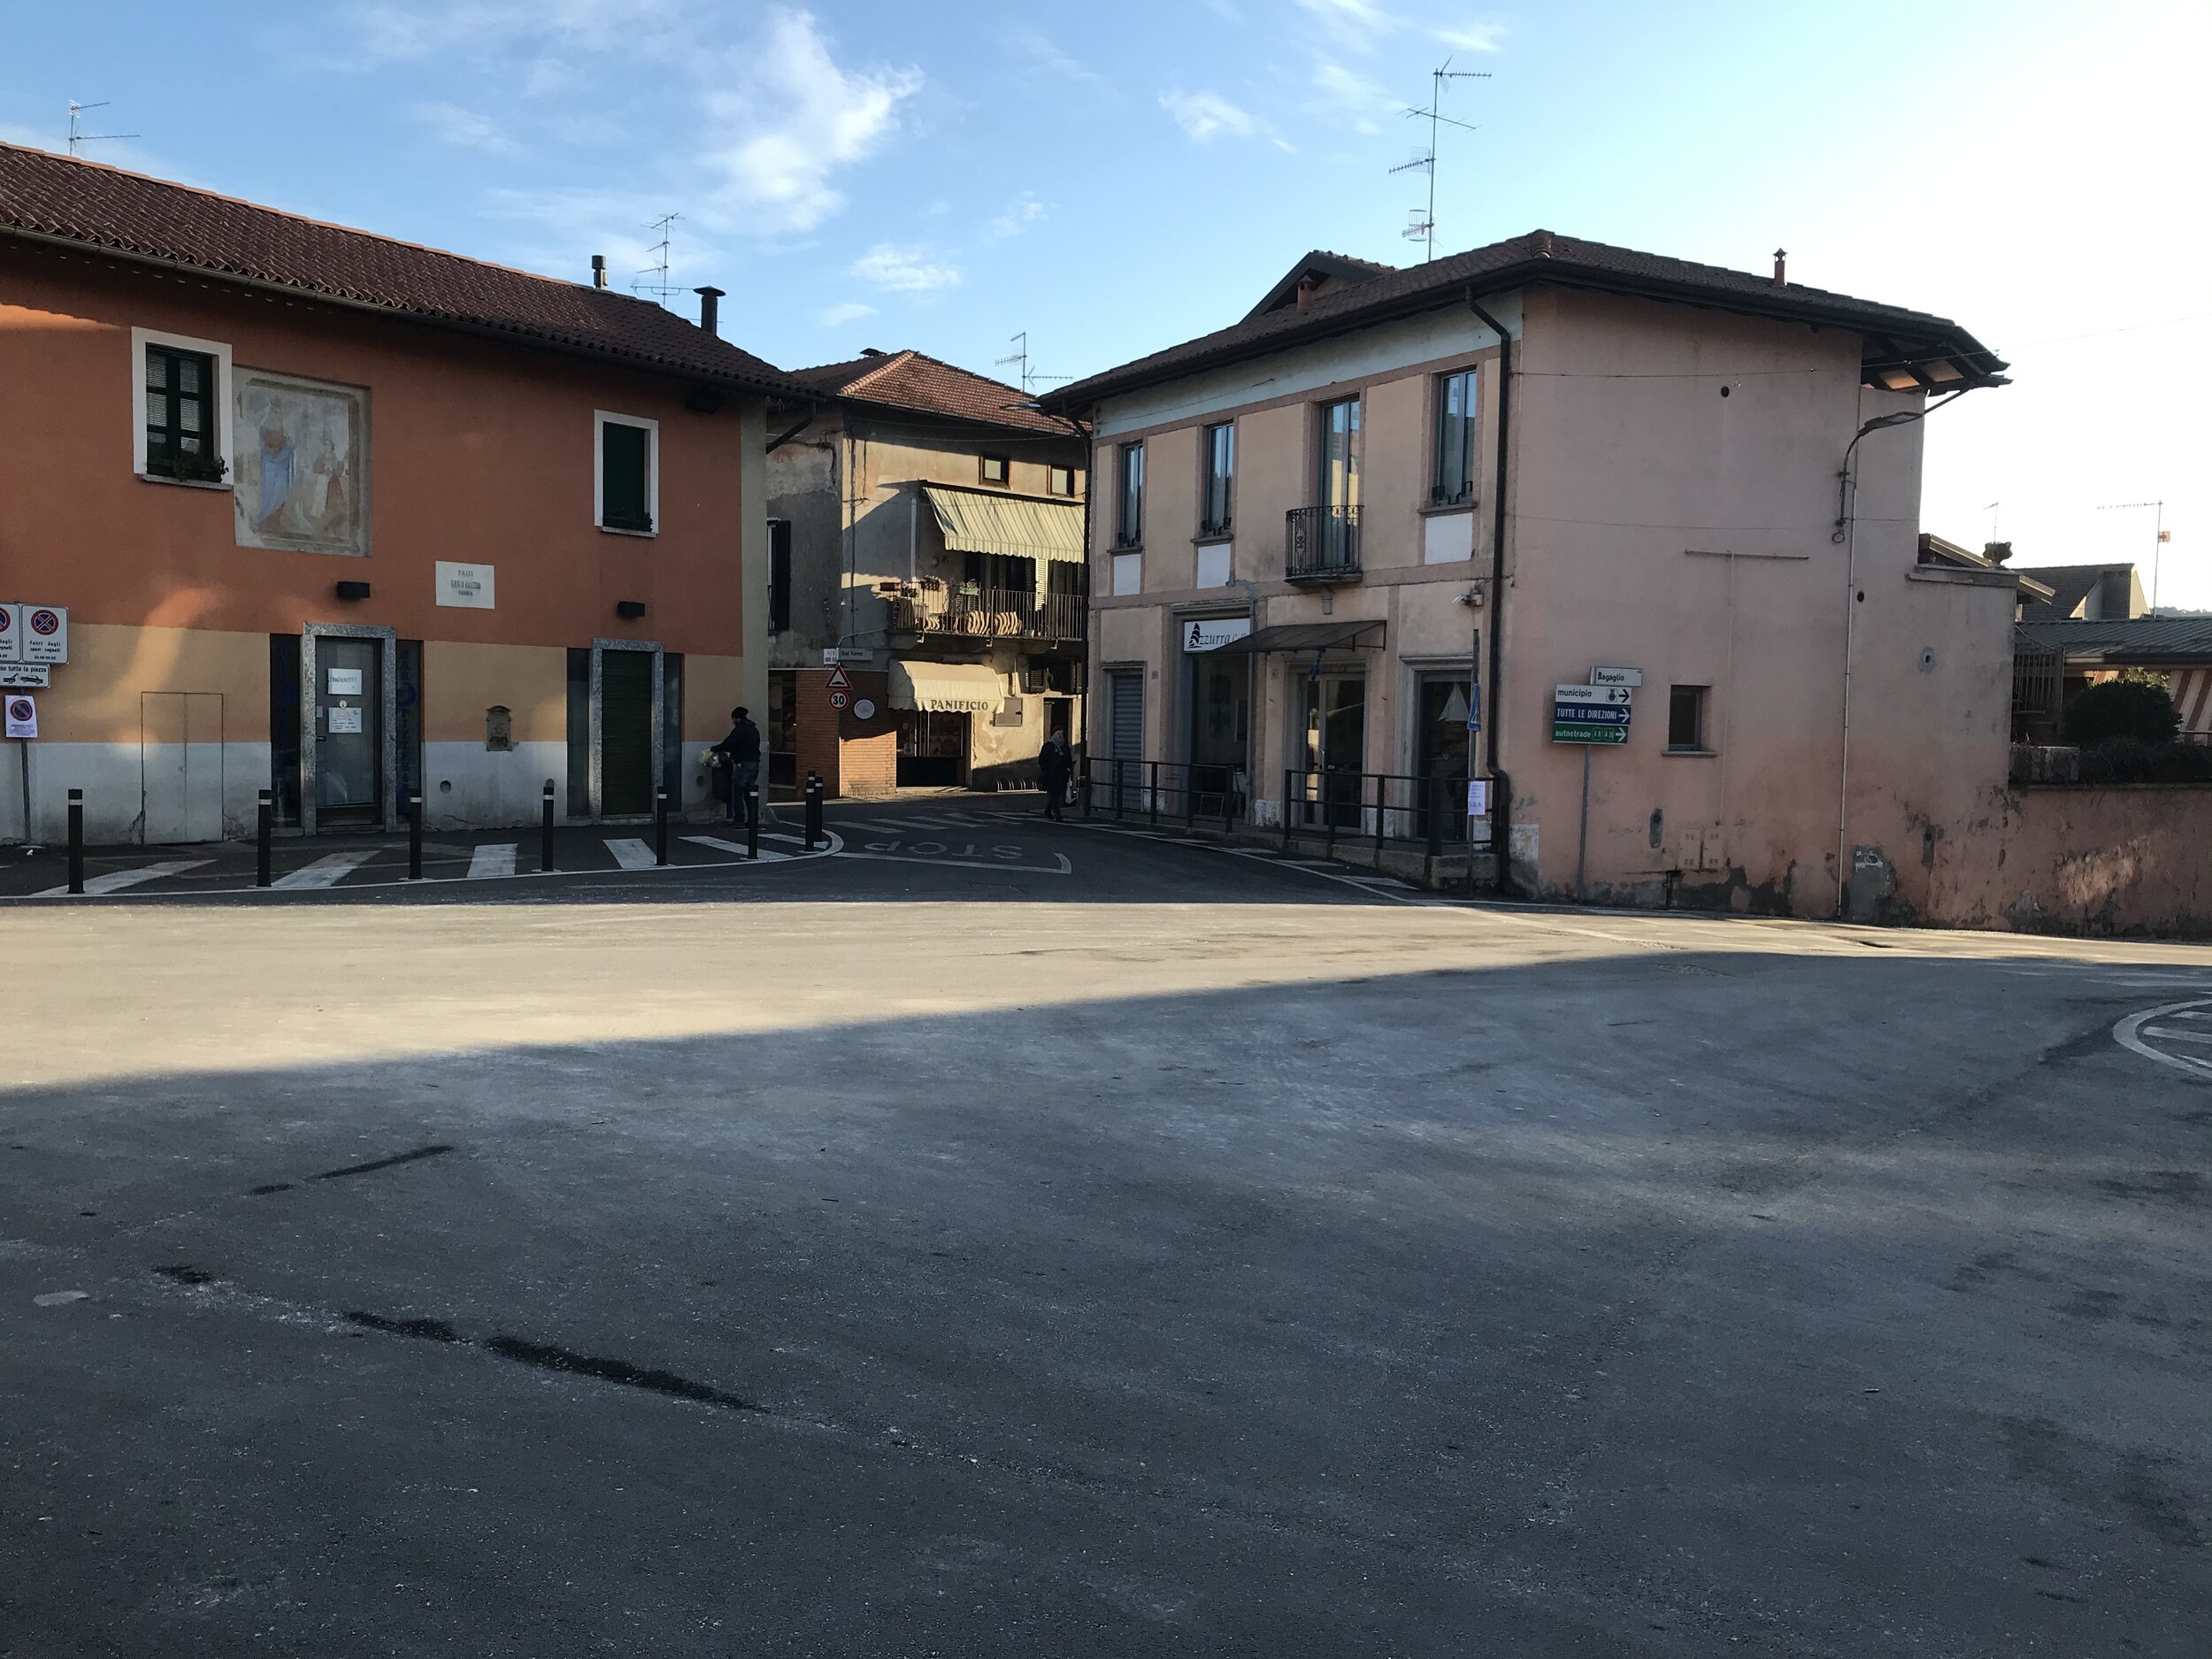  The piazza in the middle of Mercallo 